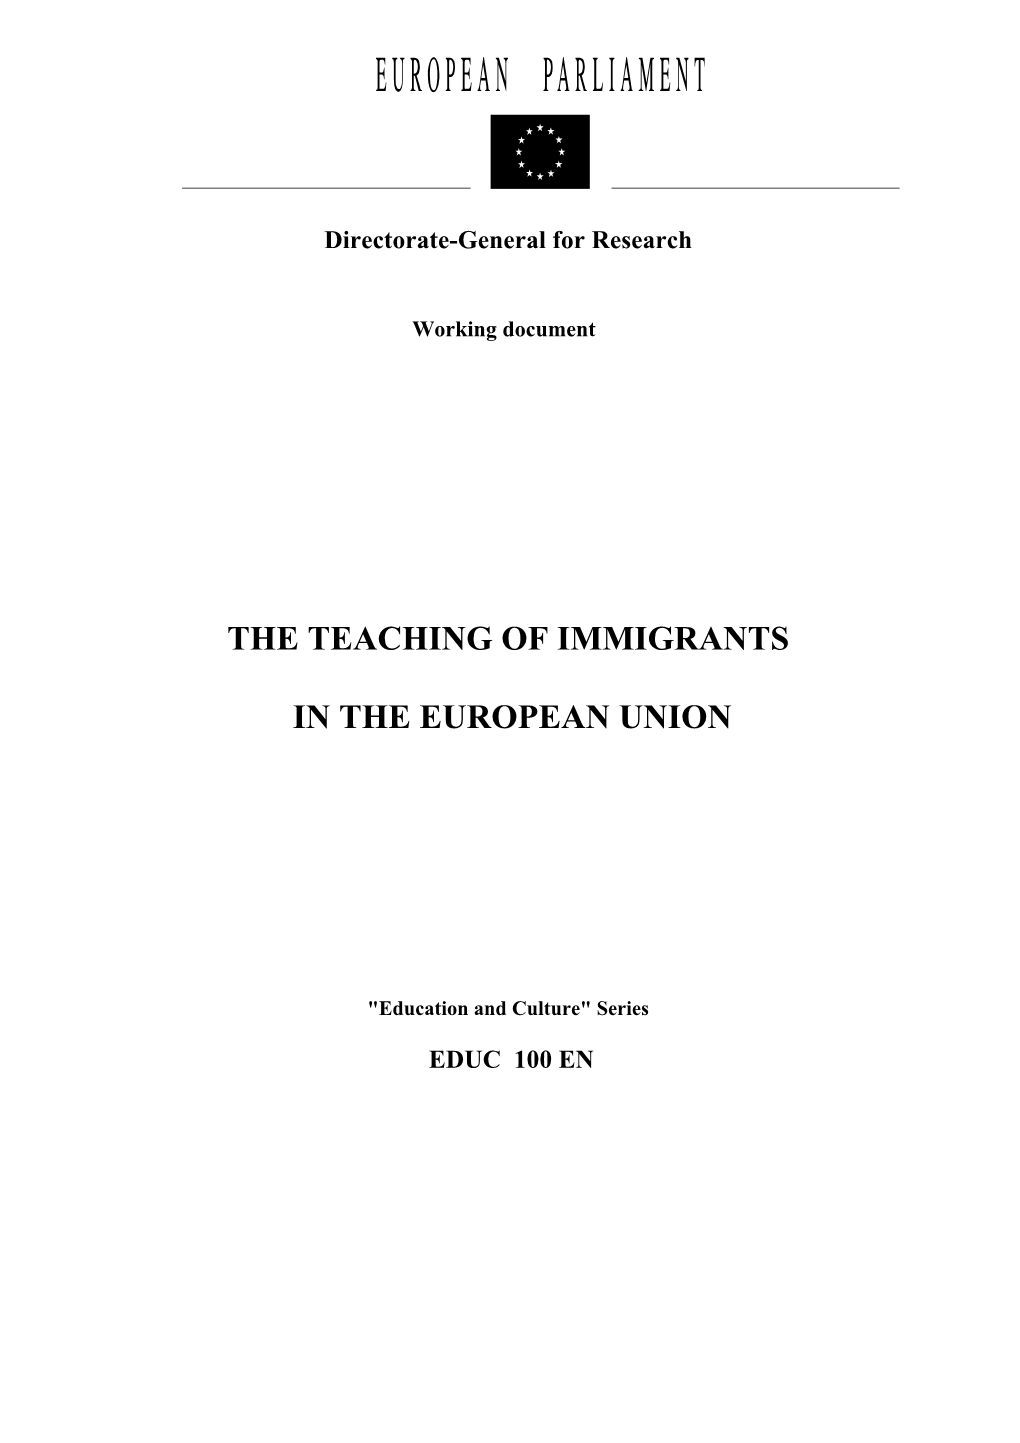 The Teaching of Immigrants in the European Union